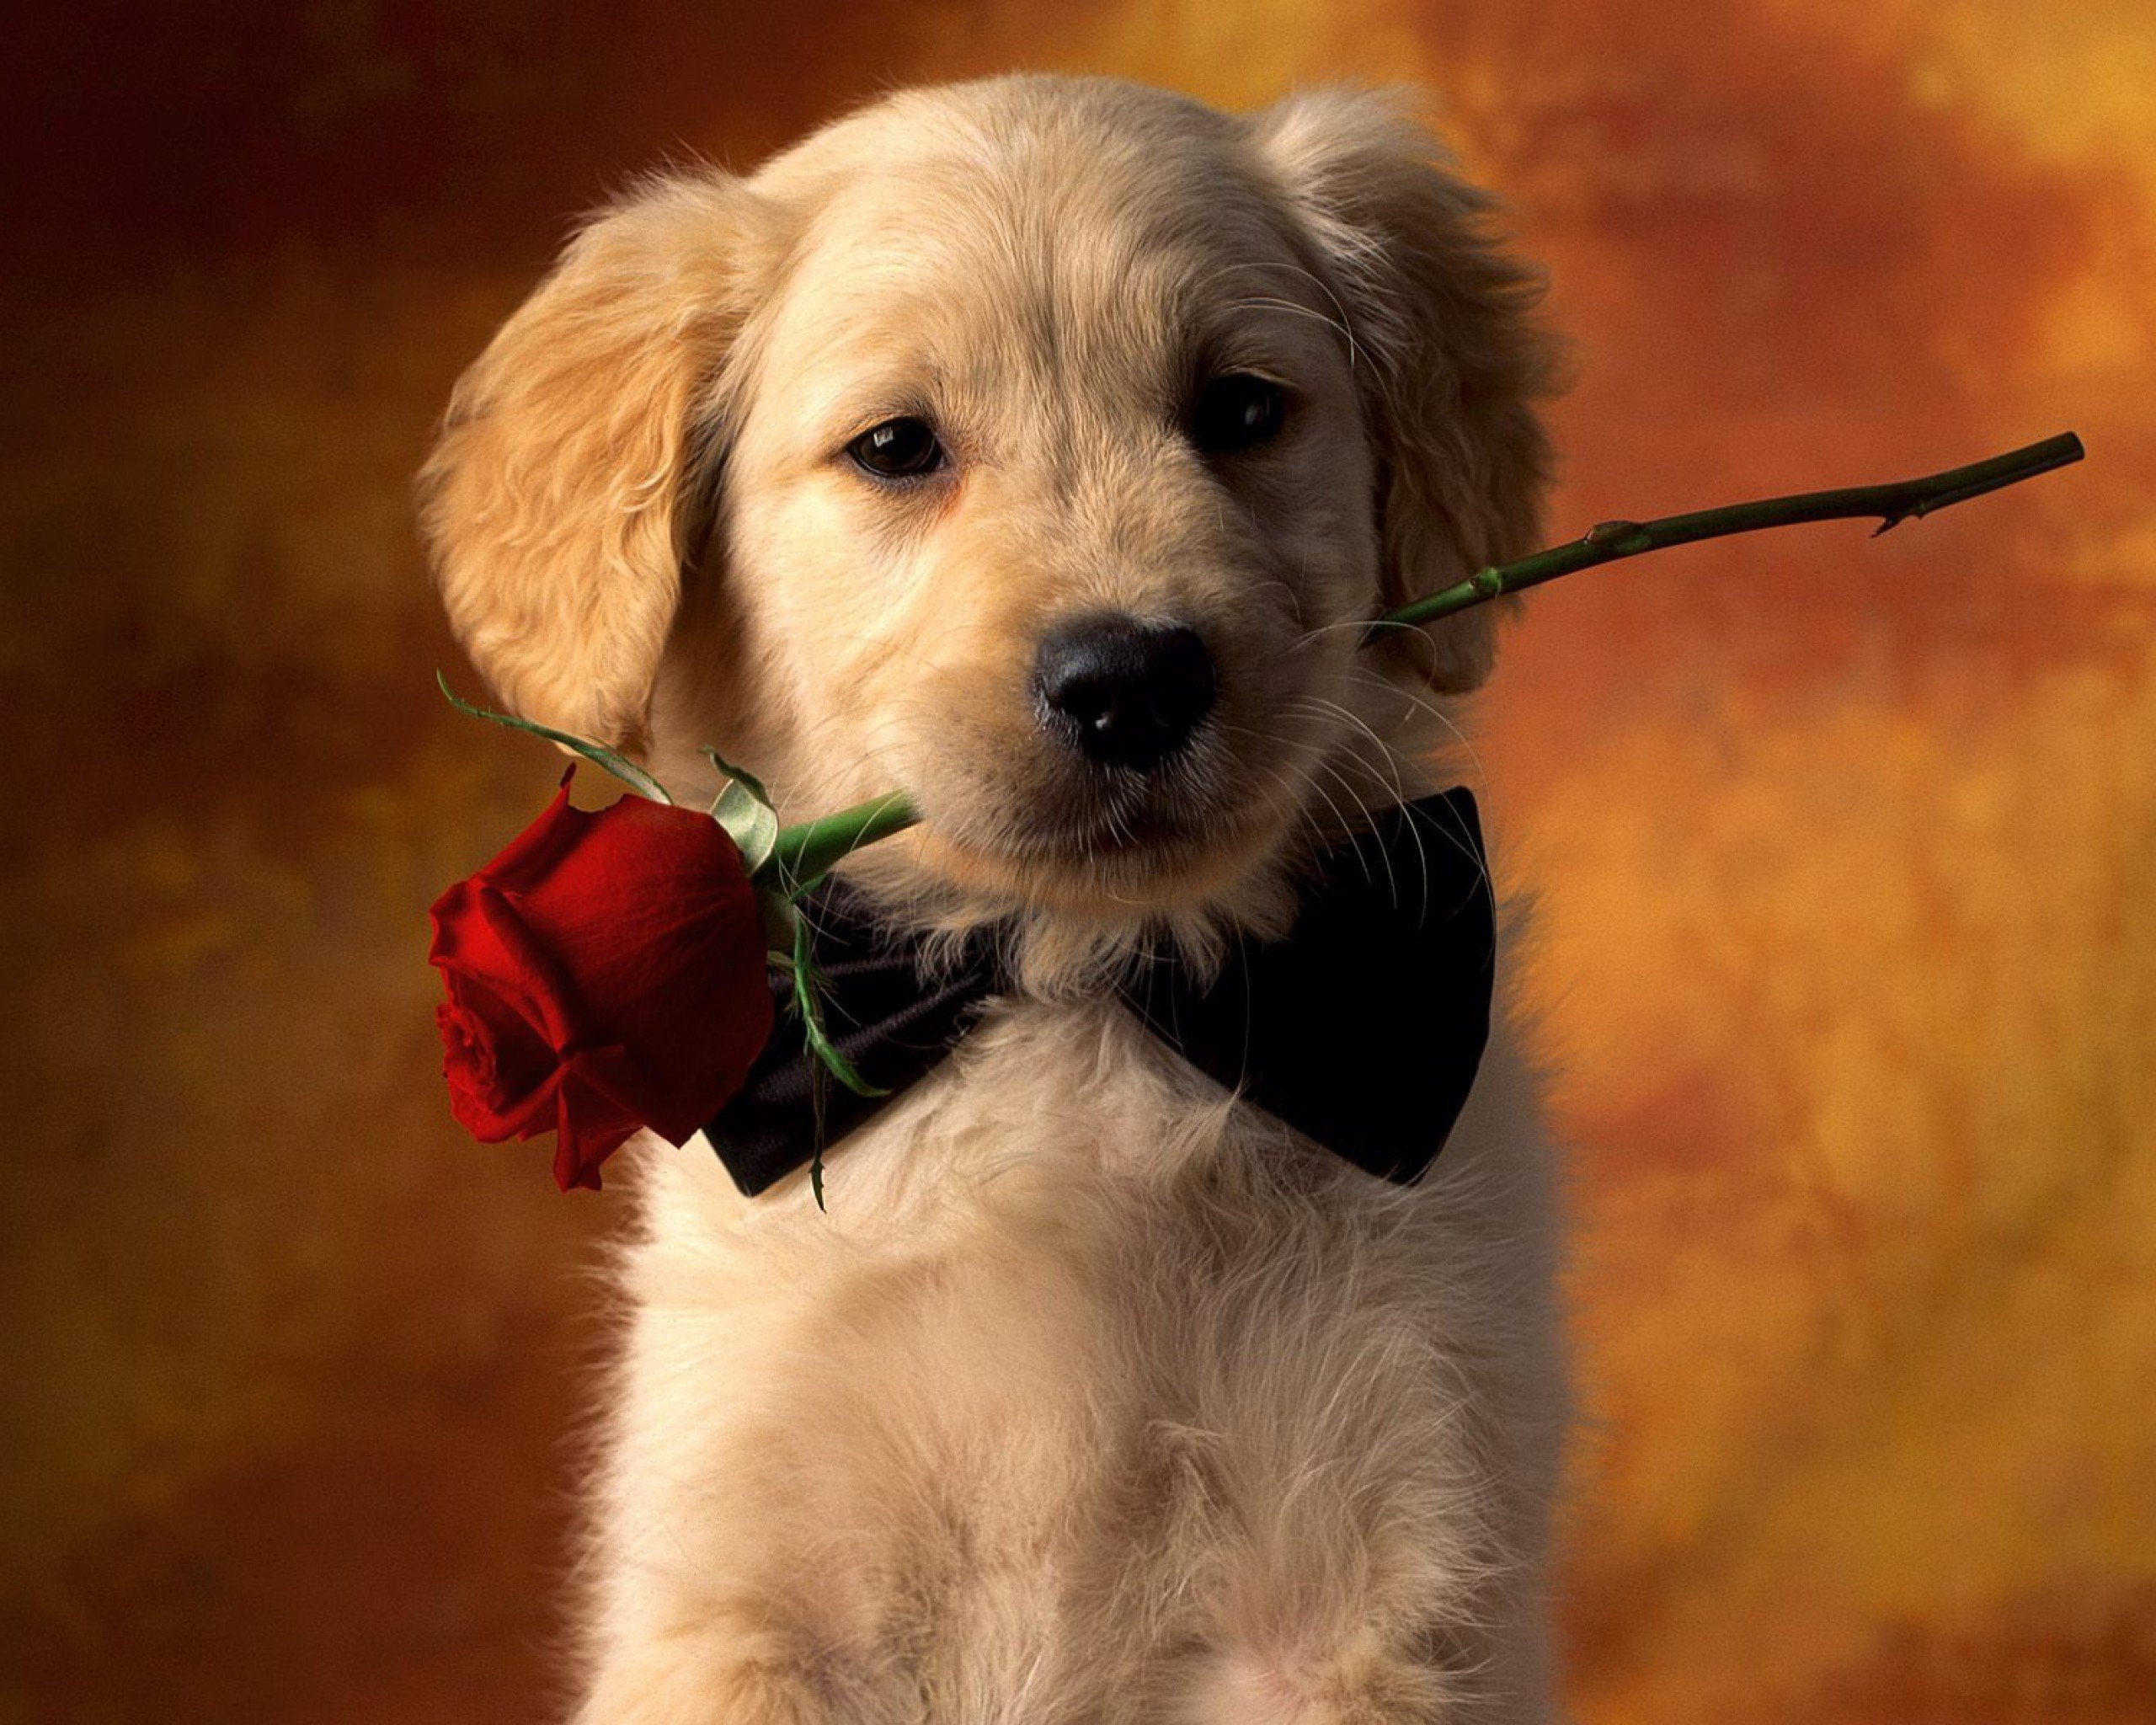 dogs, golden retriever, cute, puppy, animal, red rose